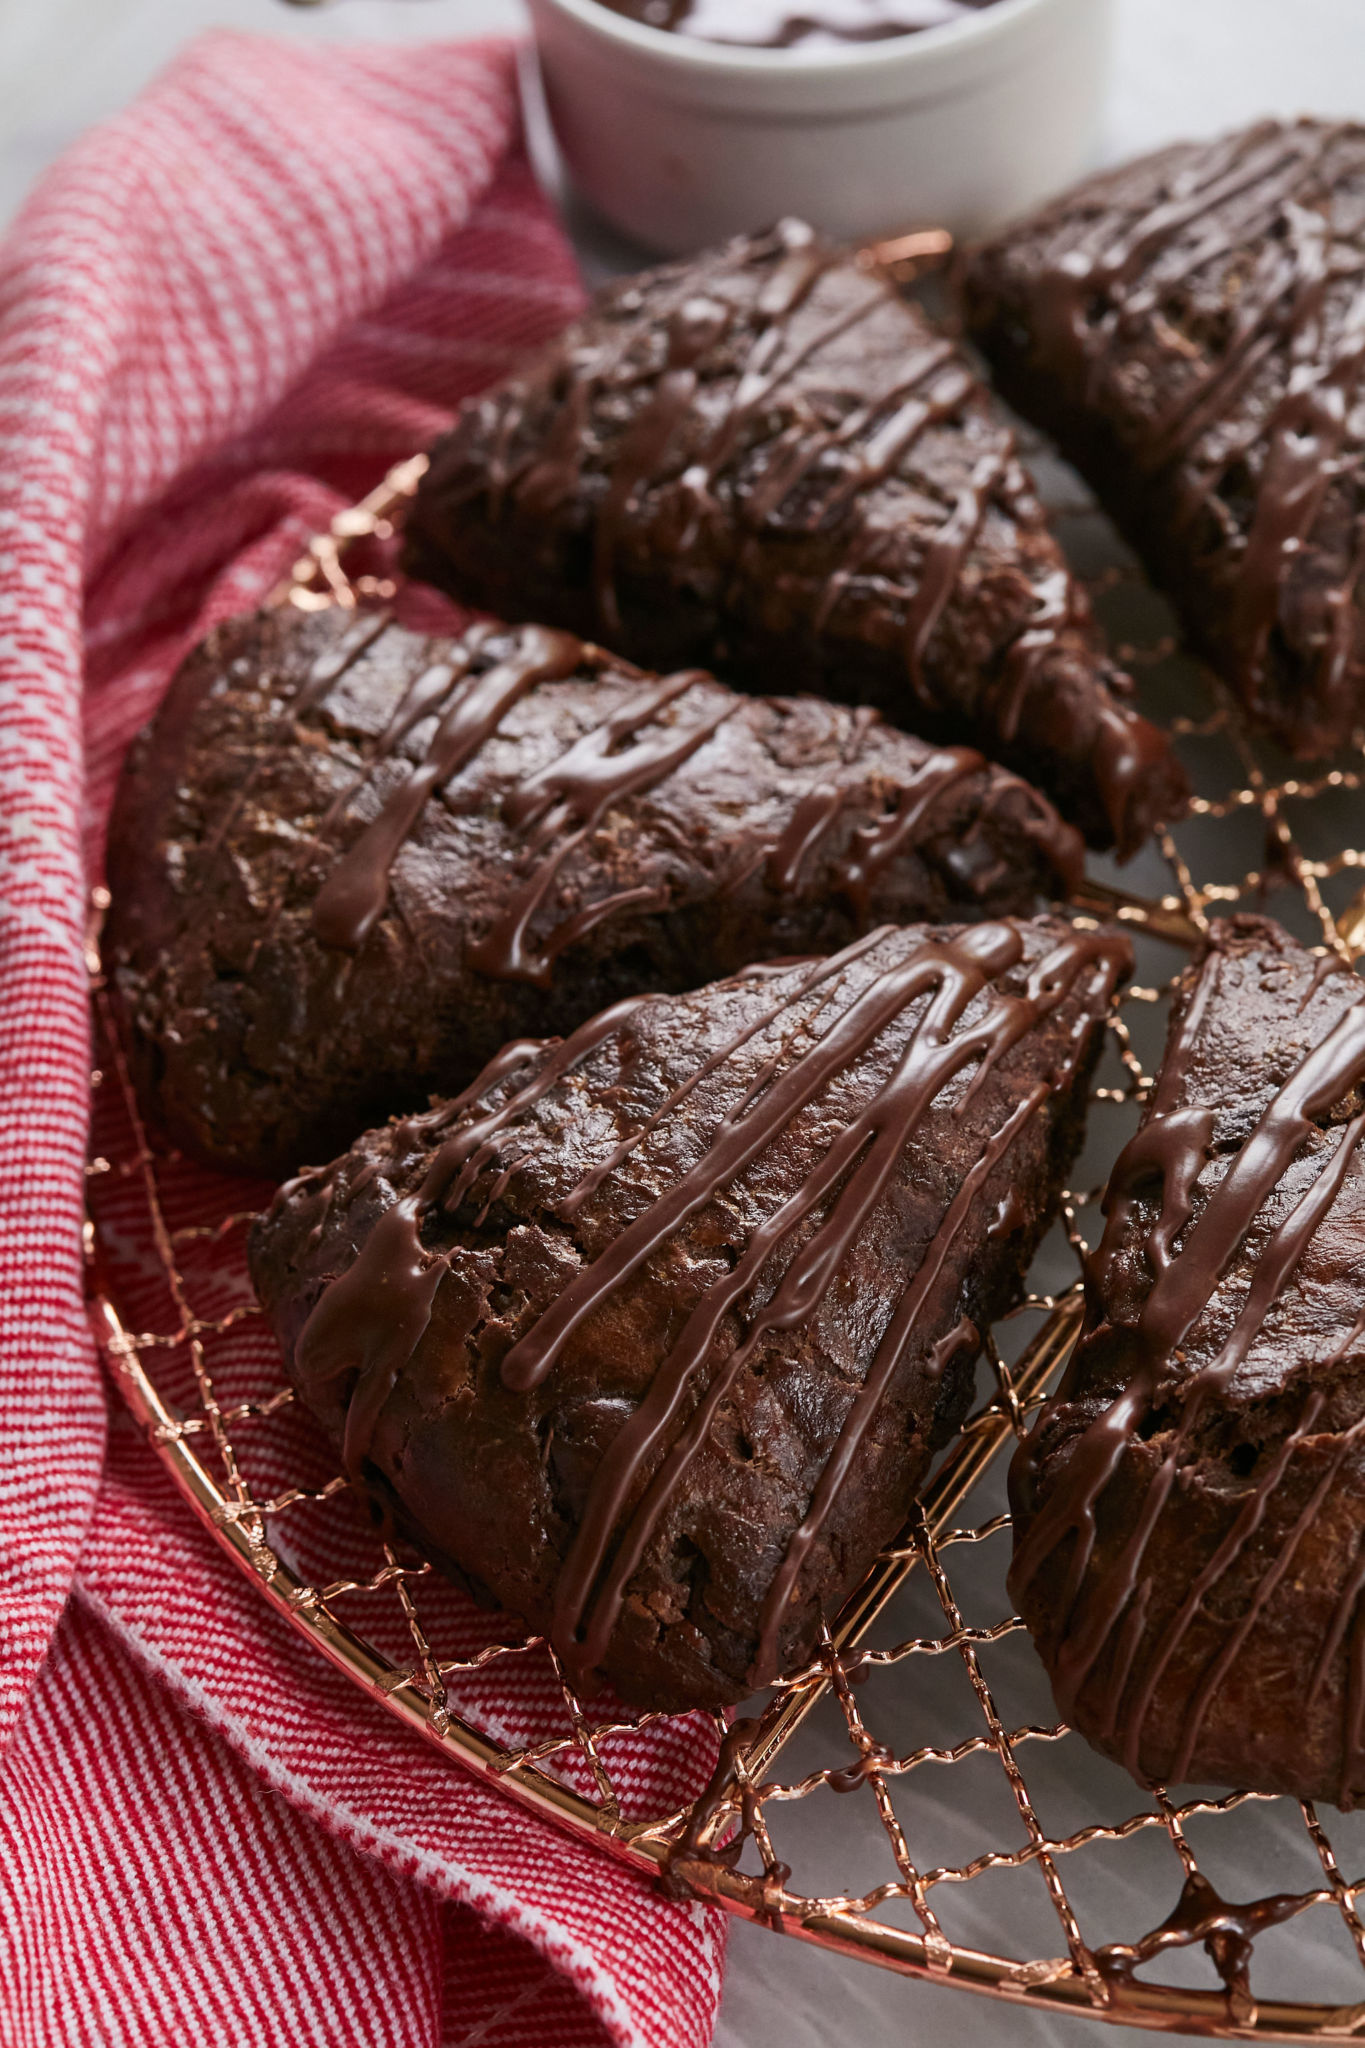 A tray of double chocolate scones, drizzled with chocolate, and cut into triangles.